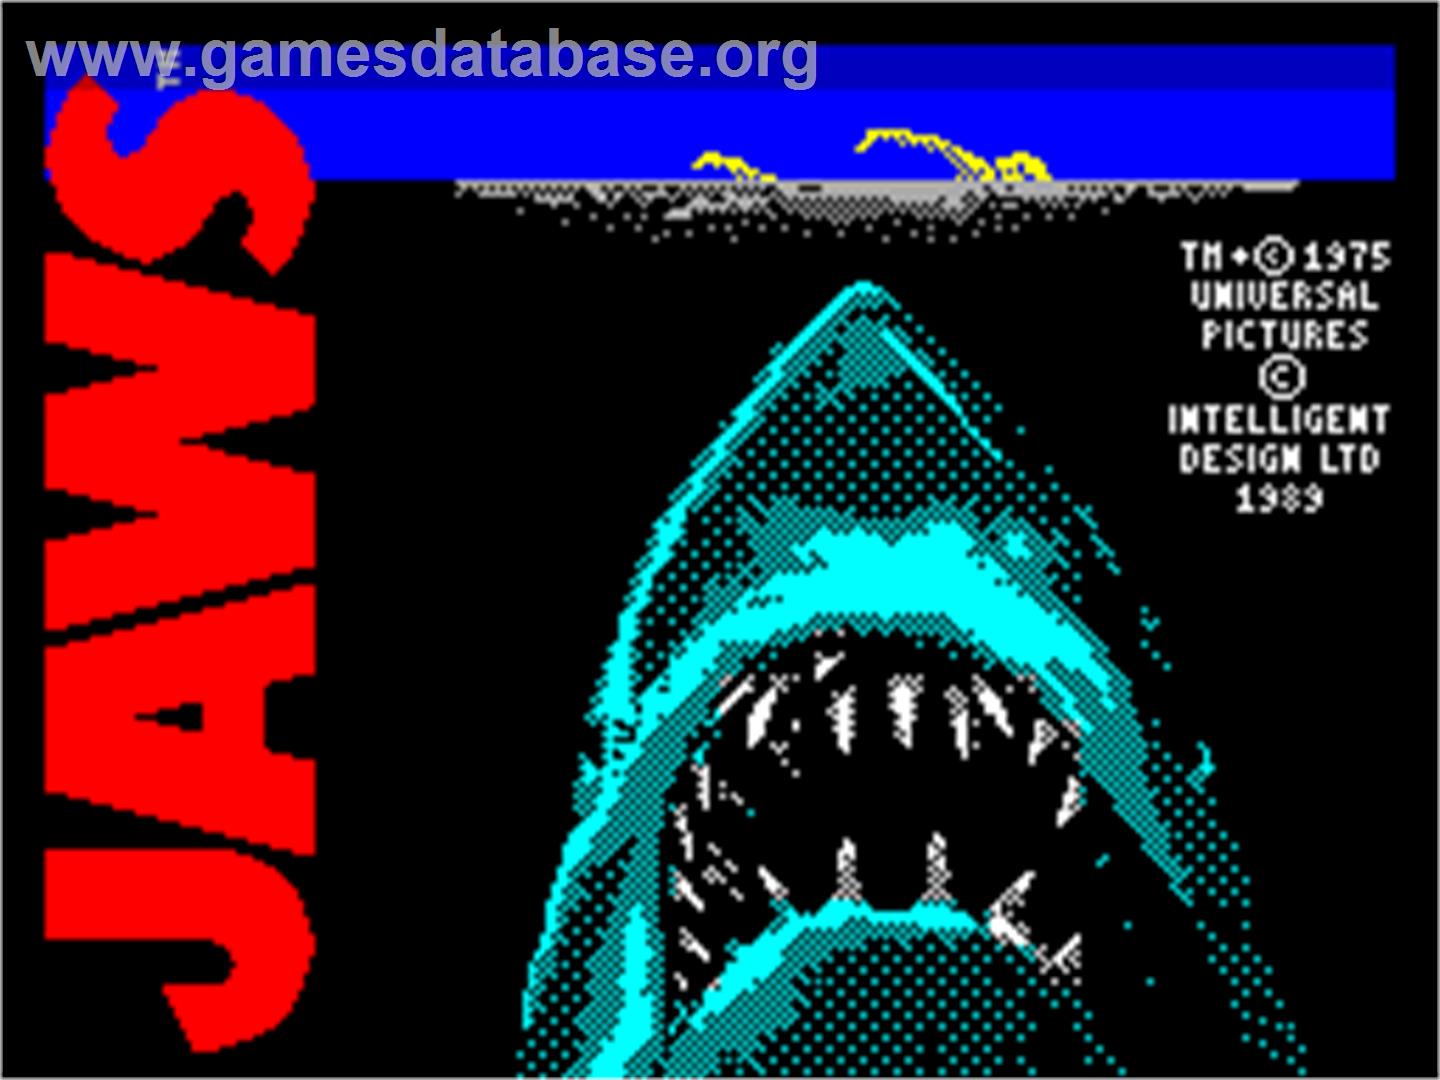 Jaws: The Computer Game - Sinclair ZX Spectrum - Artwork - Title Screen